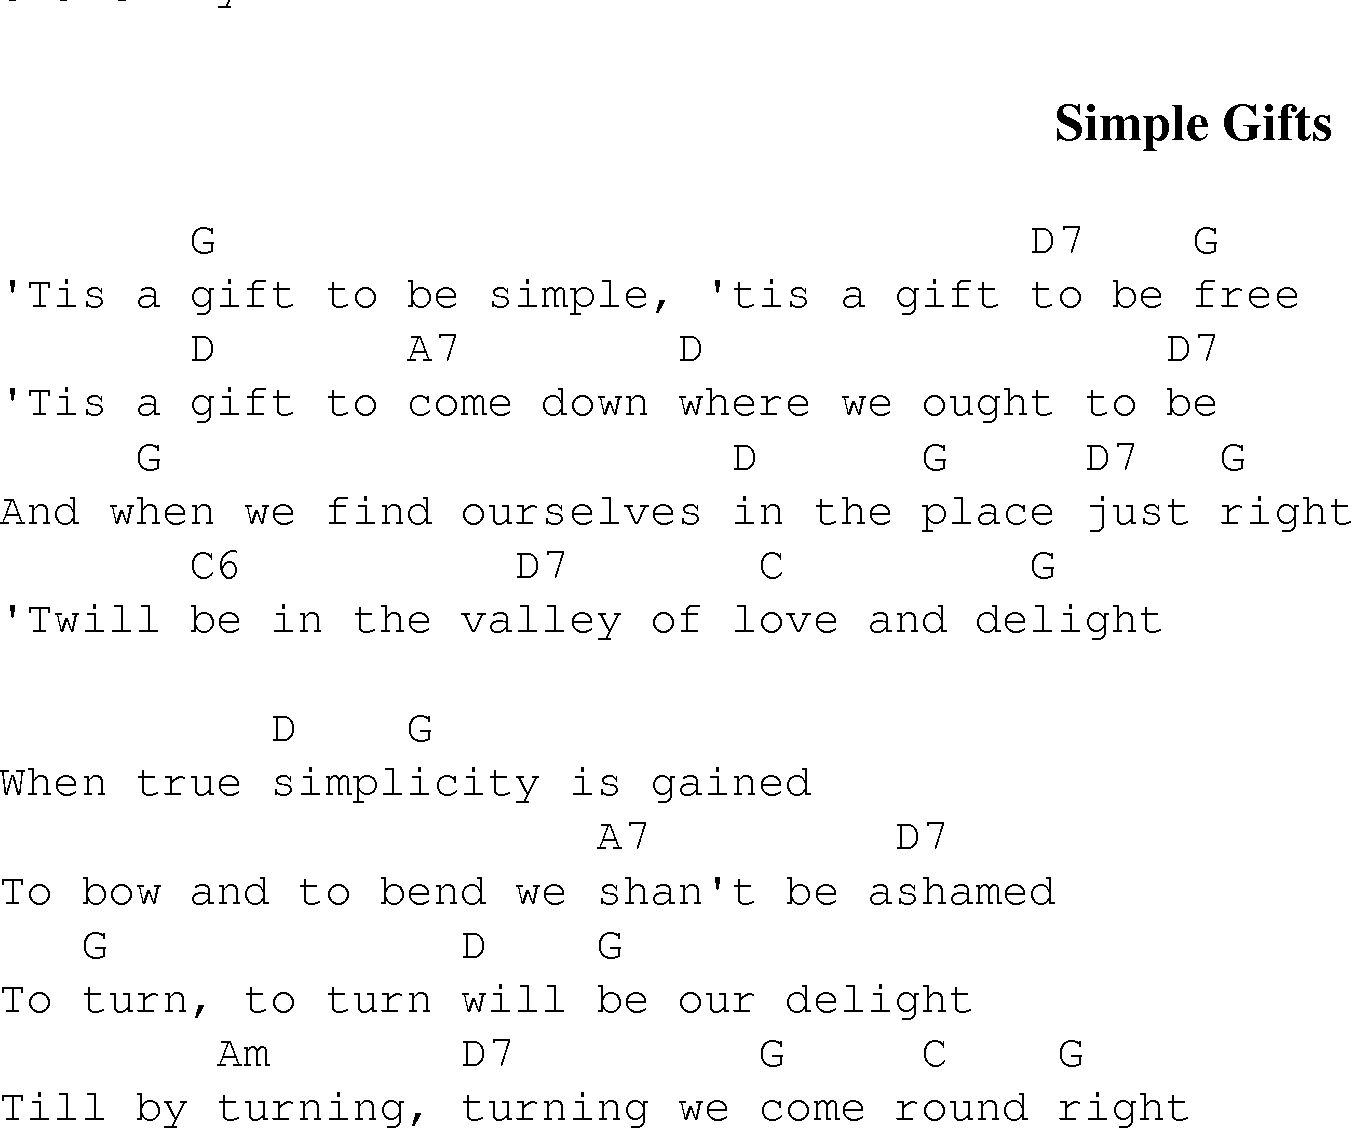 Gospel Song: simple_gifts, lyrics and chords.